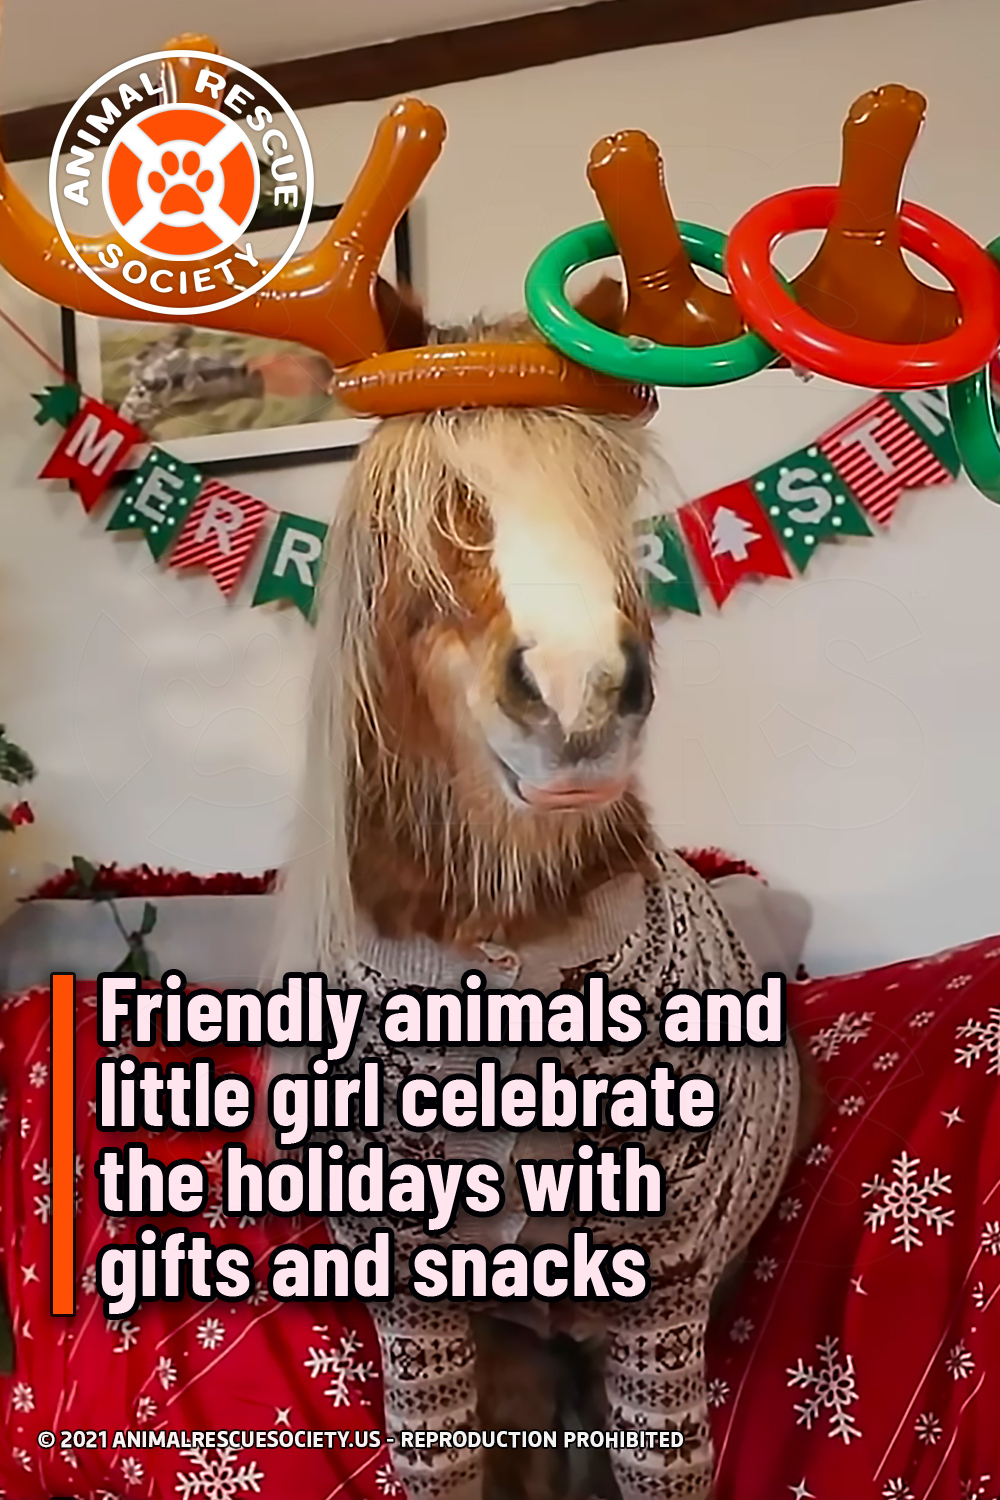 Friendly animals and little girl celebrate the holidays with gifts and snacks